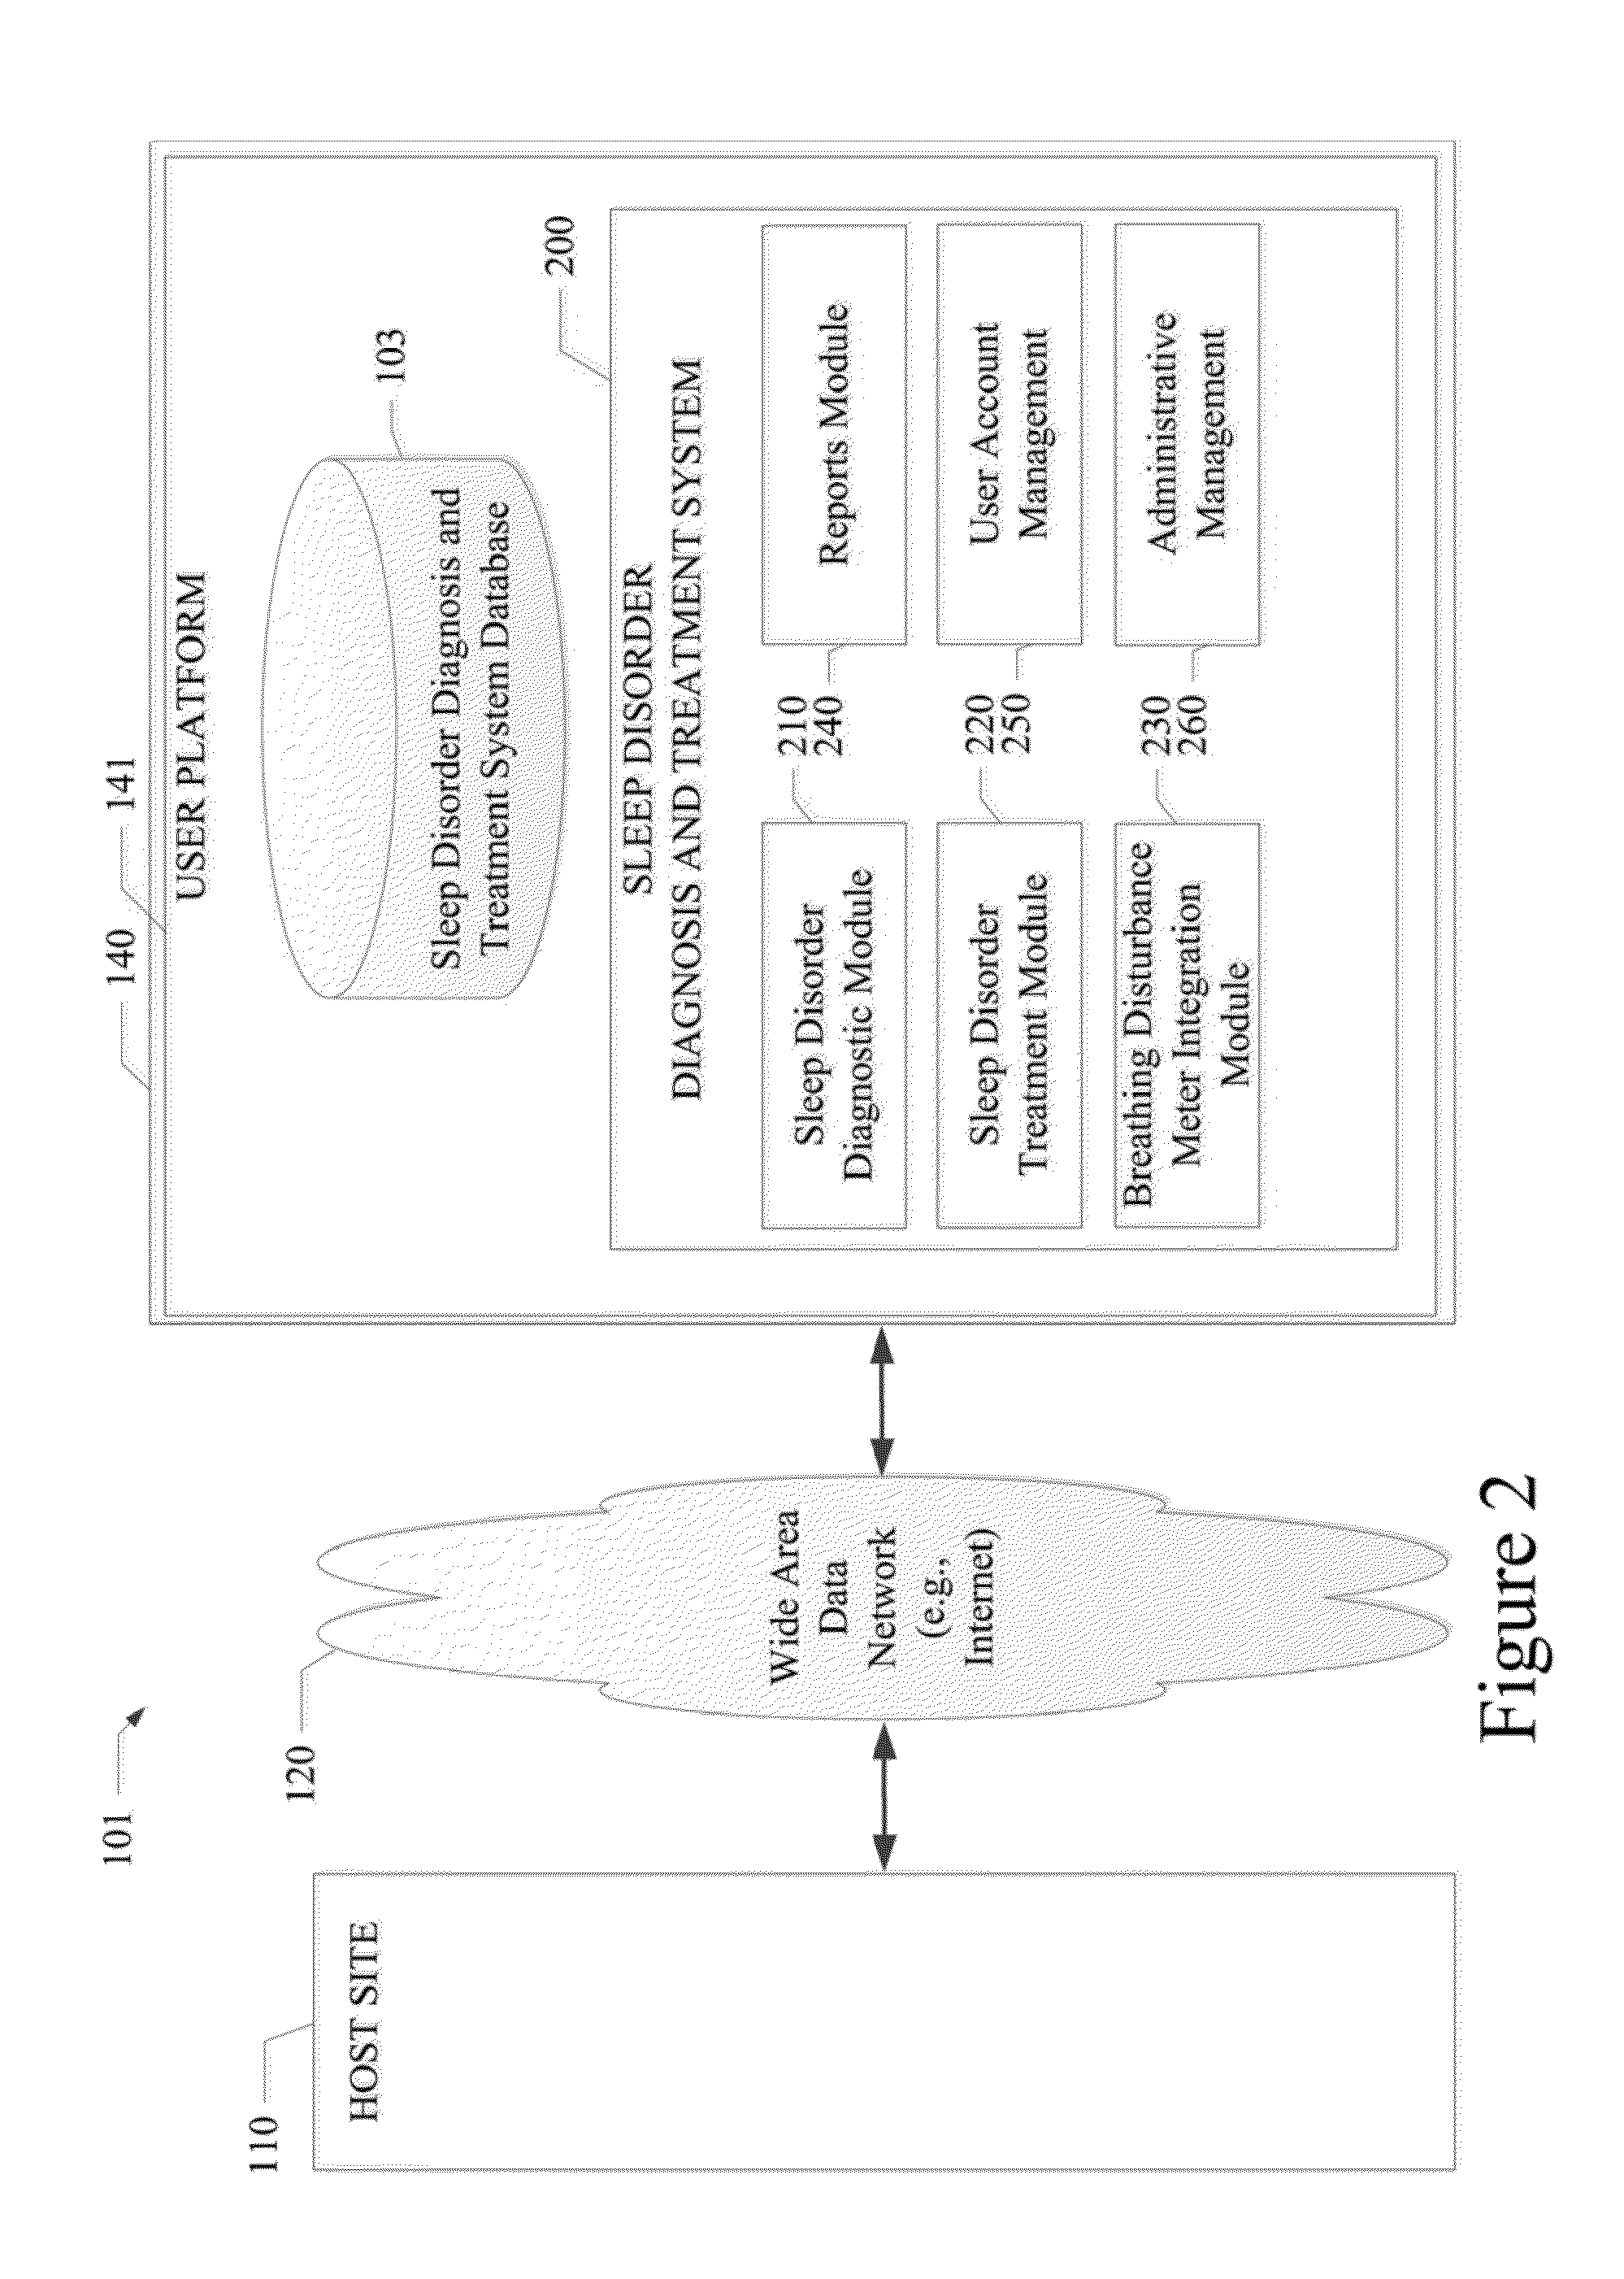 System and method for sleep disorder diagnosis and treatment